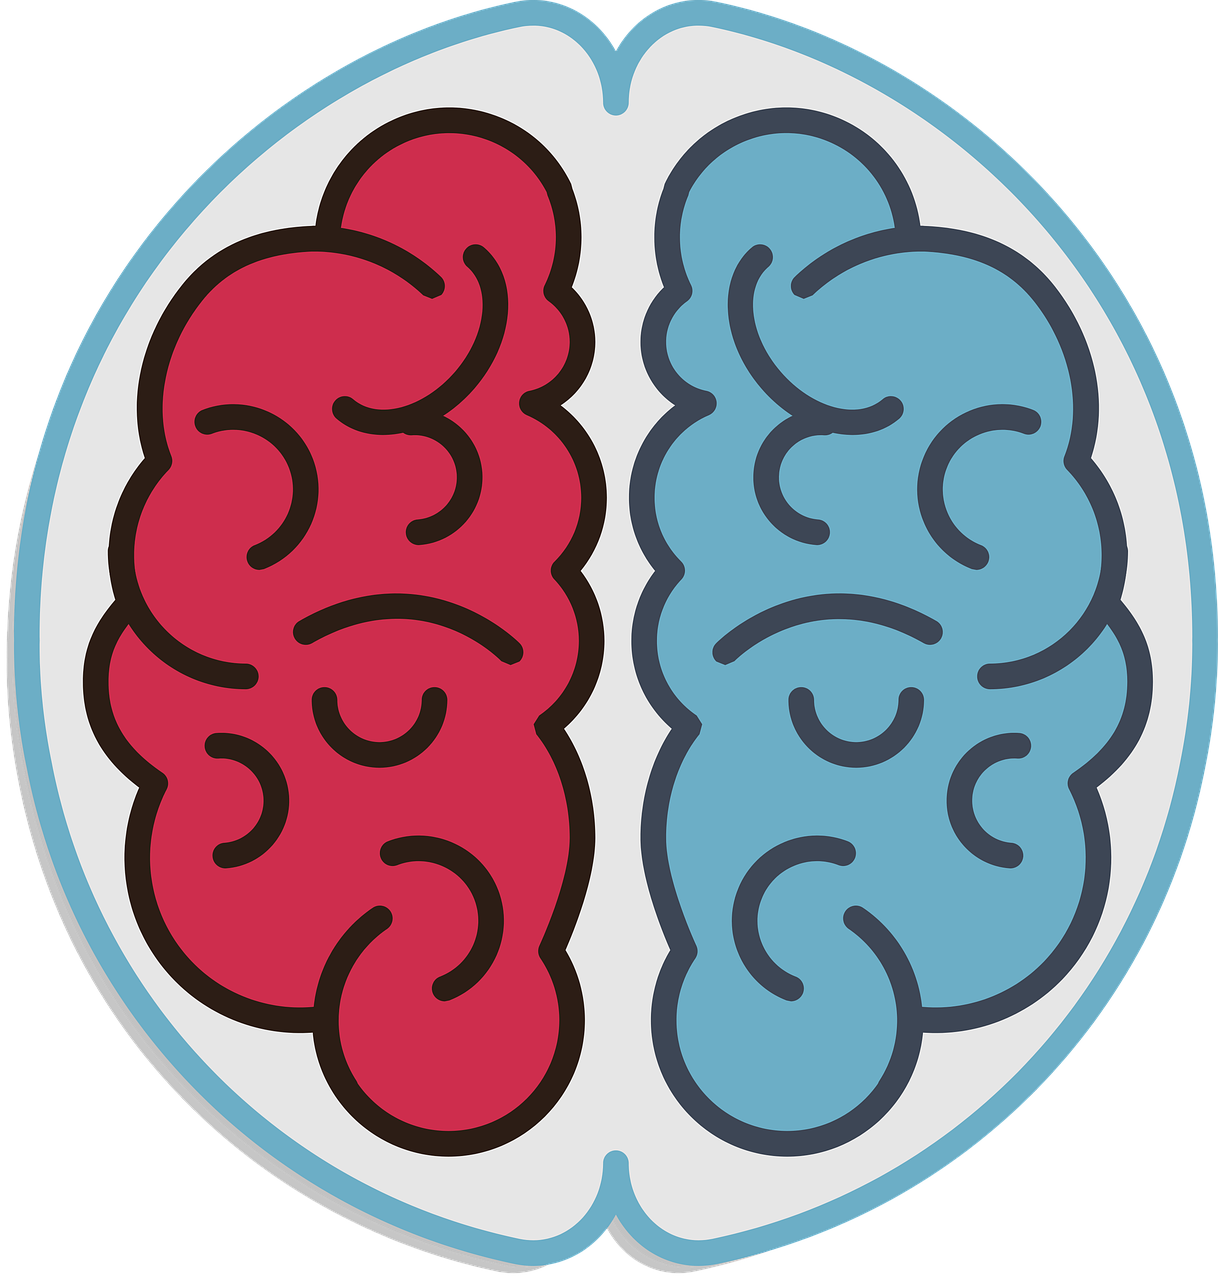 a picture of two halves of a brain, flat - color, badge, blue or red, intelligent design